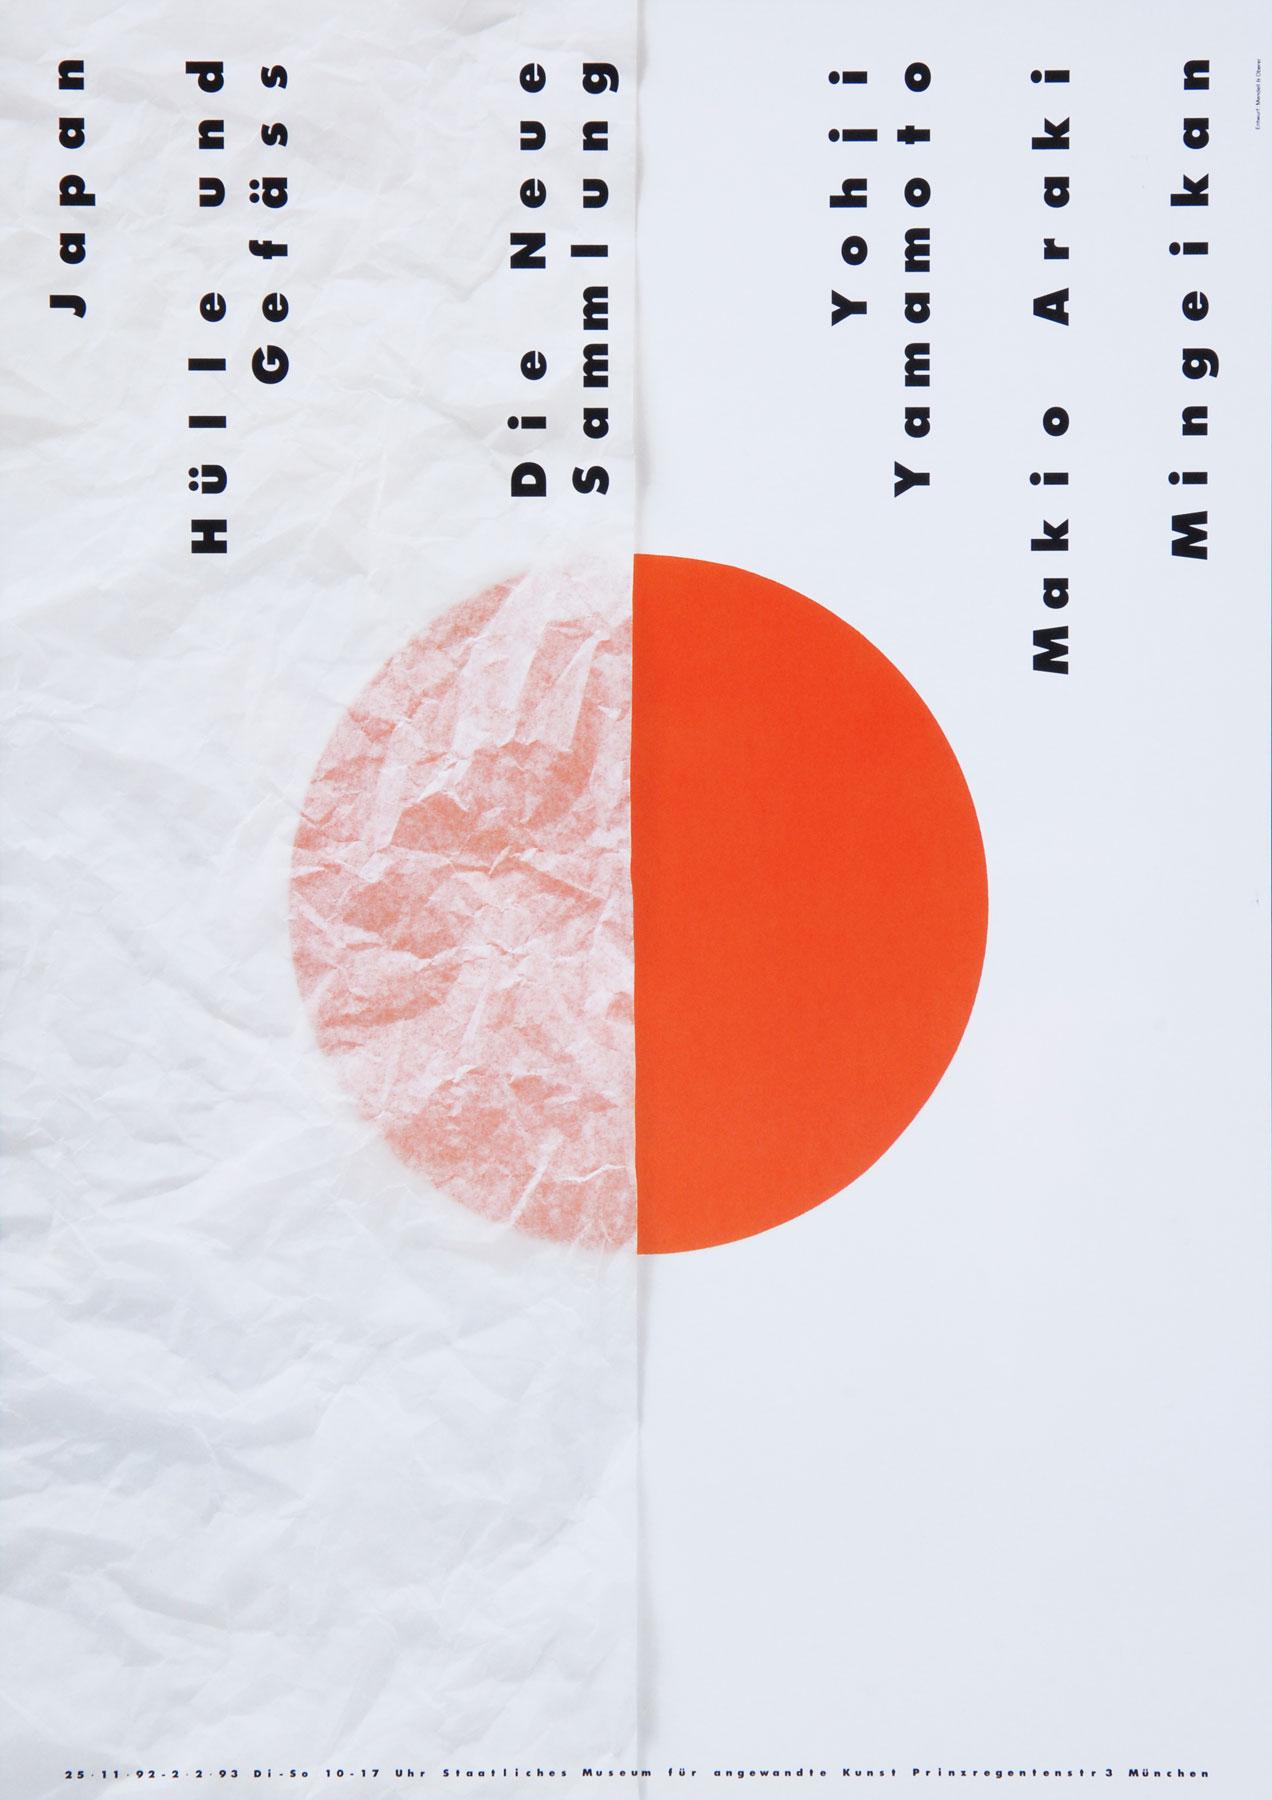 The exhibition poster shows the Japanese flag, half overlaid on the left side by thin, white rice paper. Above it, the artists (Yohji Yamamoto; Makio Araki; Mingeikan) and the exhibition title (left) are printed in black letters.